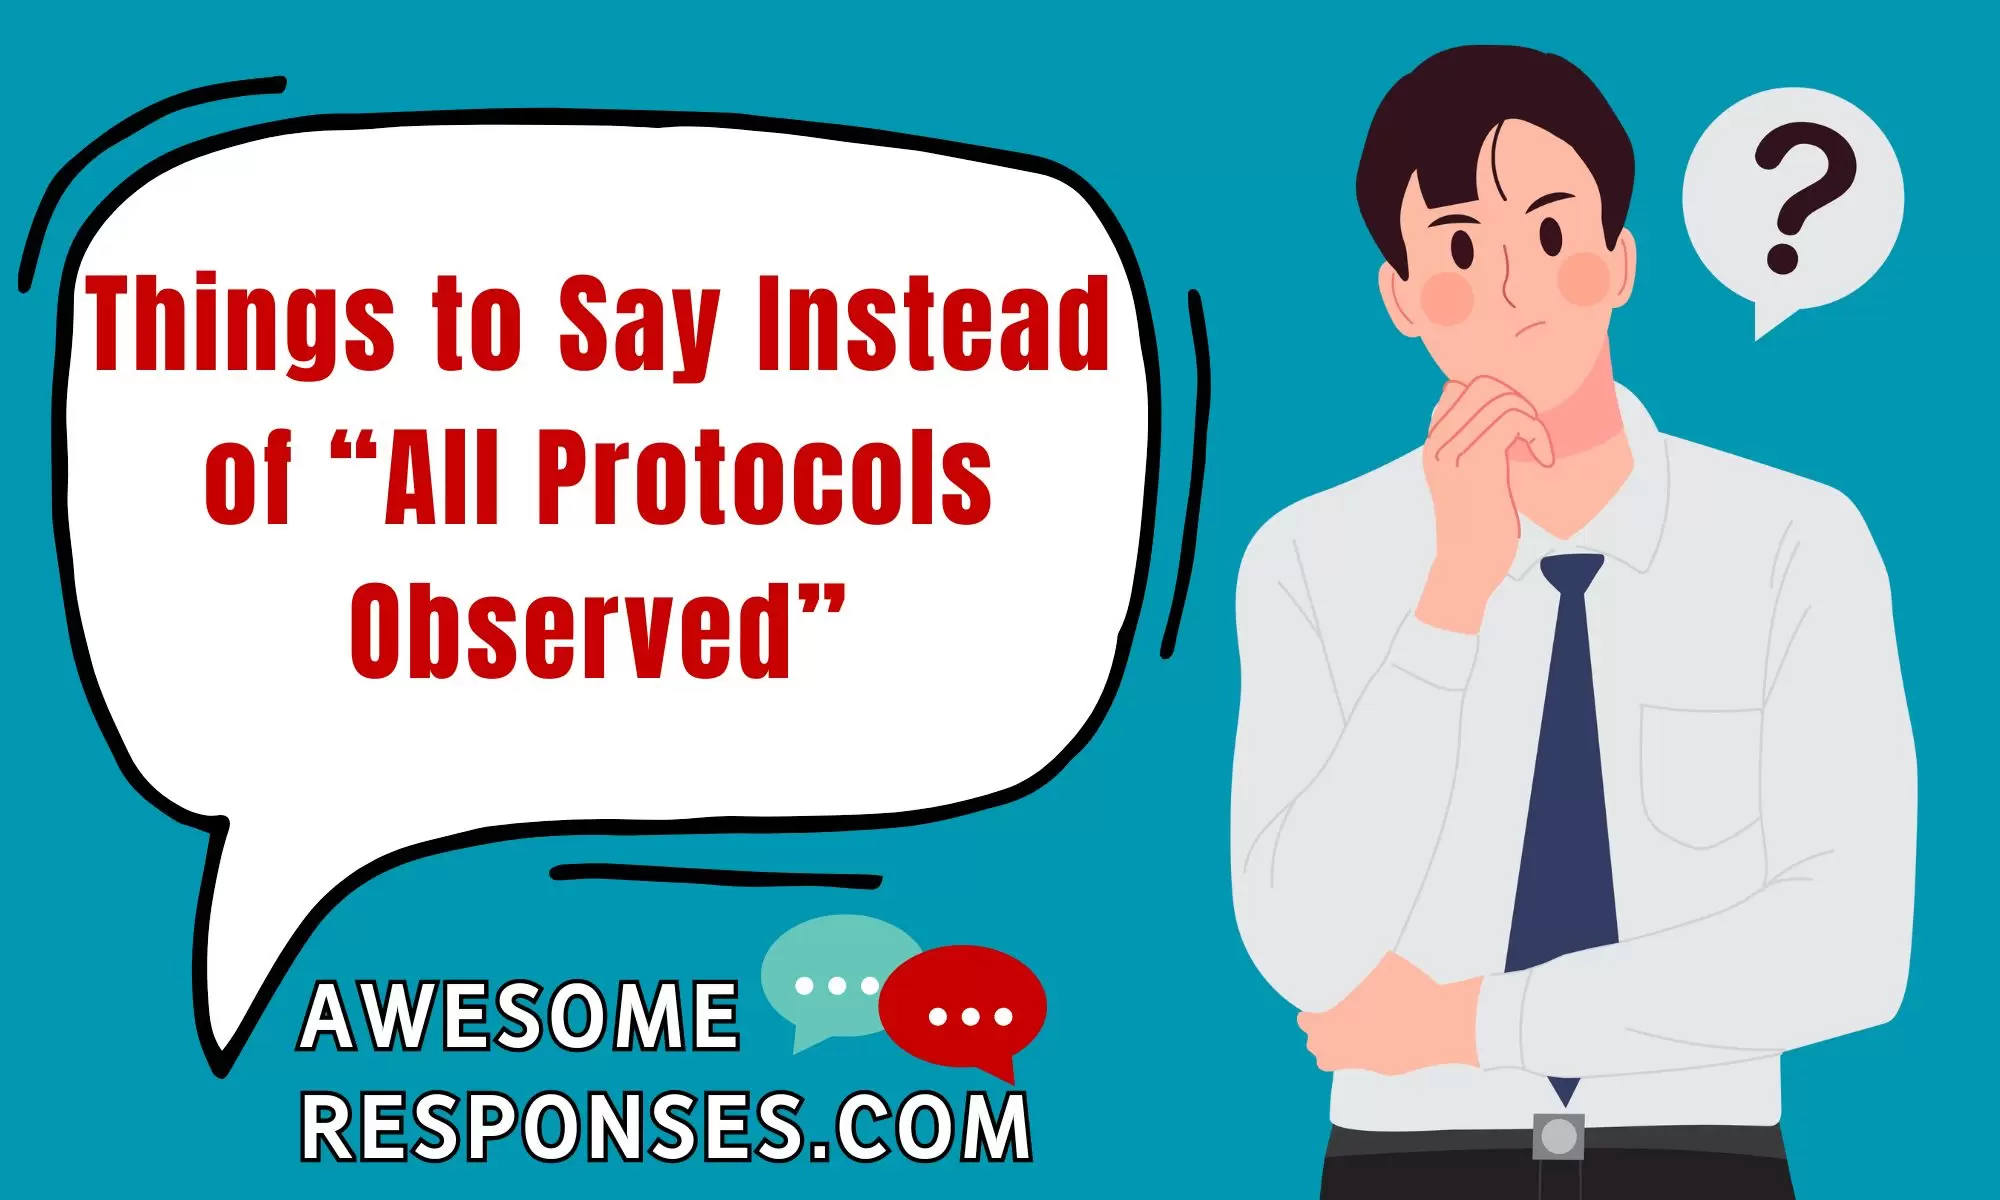 Things to Say Instead of “All Protocols Observed”